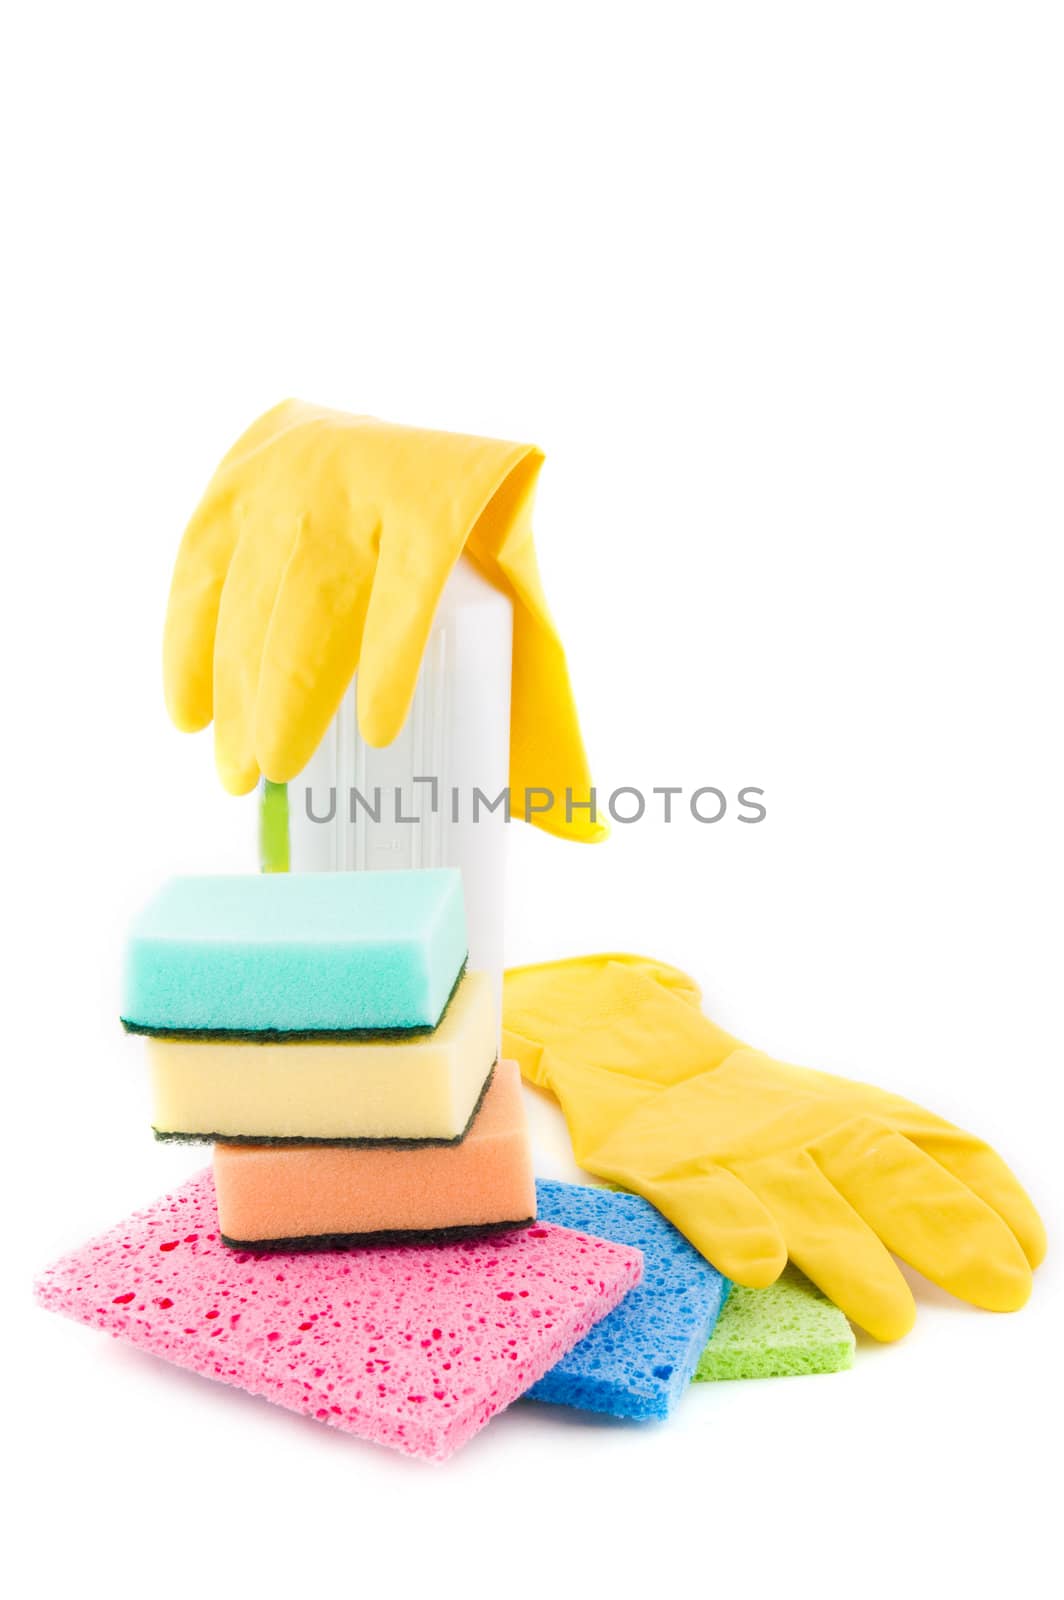 Sanitation and cleaning products over white